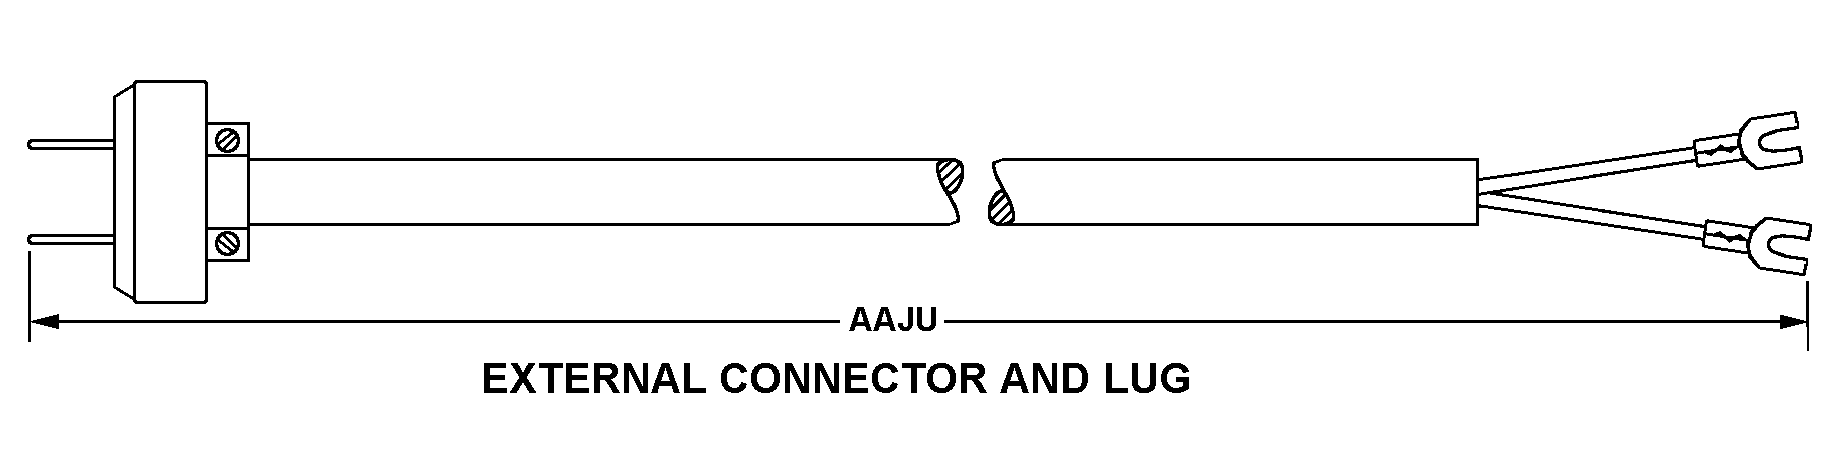 EXTERNAL CONNECTOR AND LUG style nsn 6150-01-243-0237